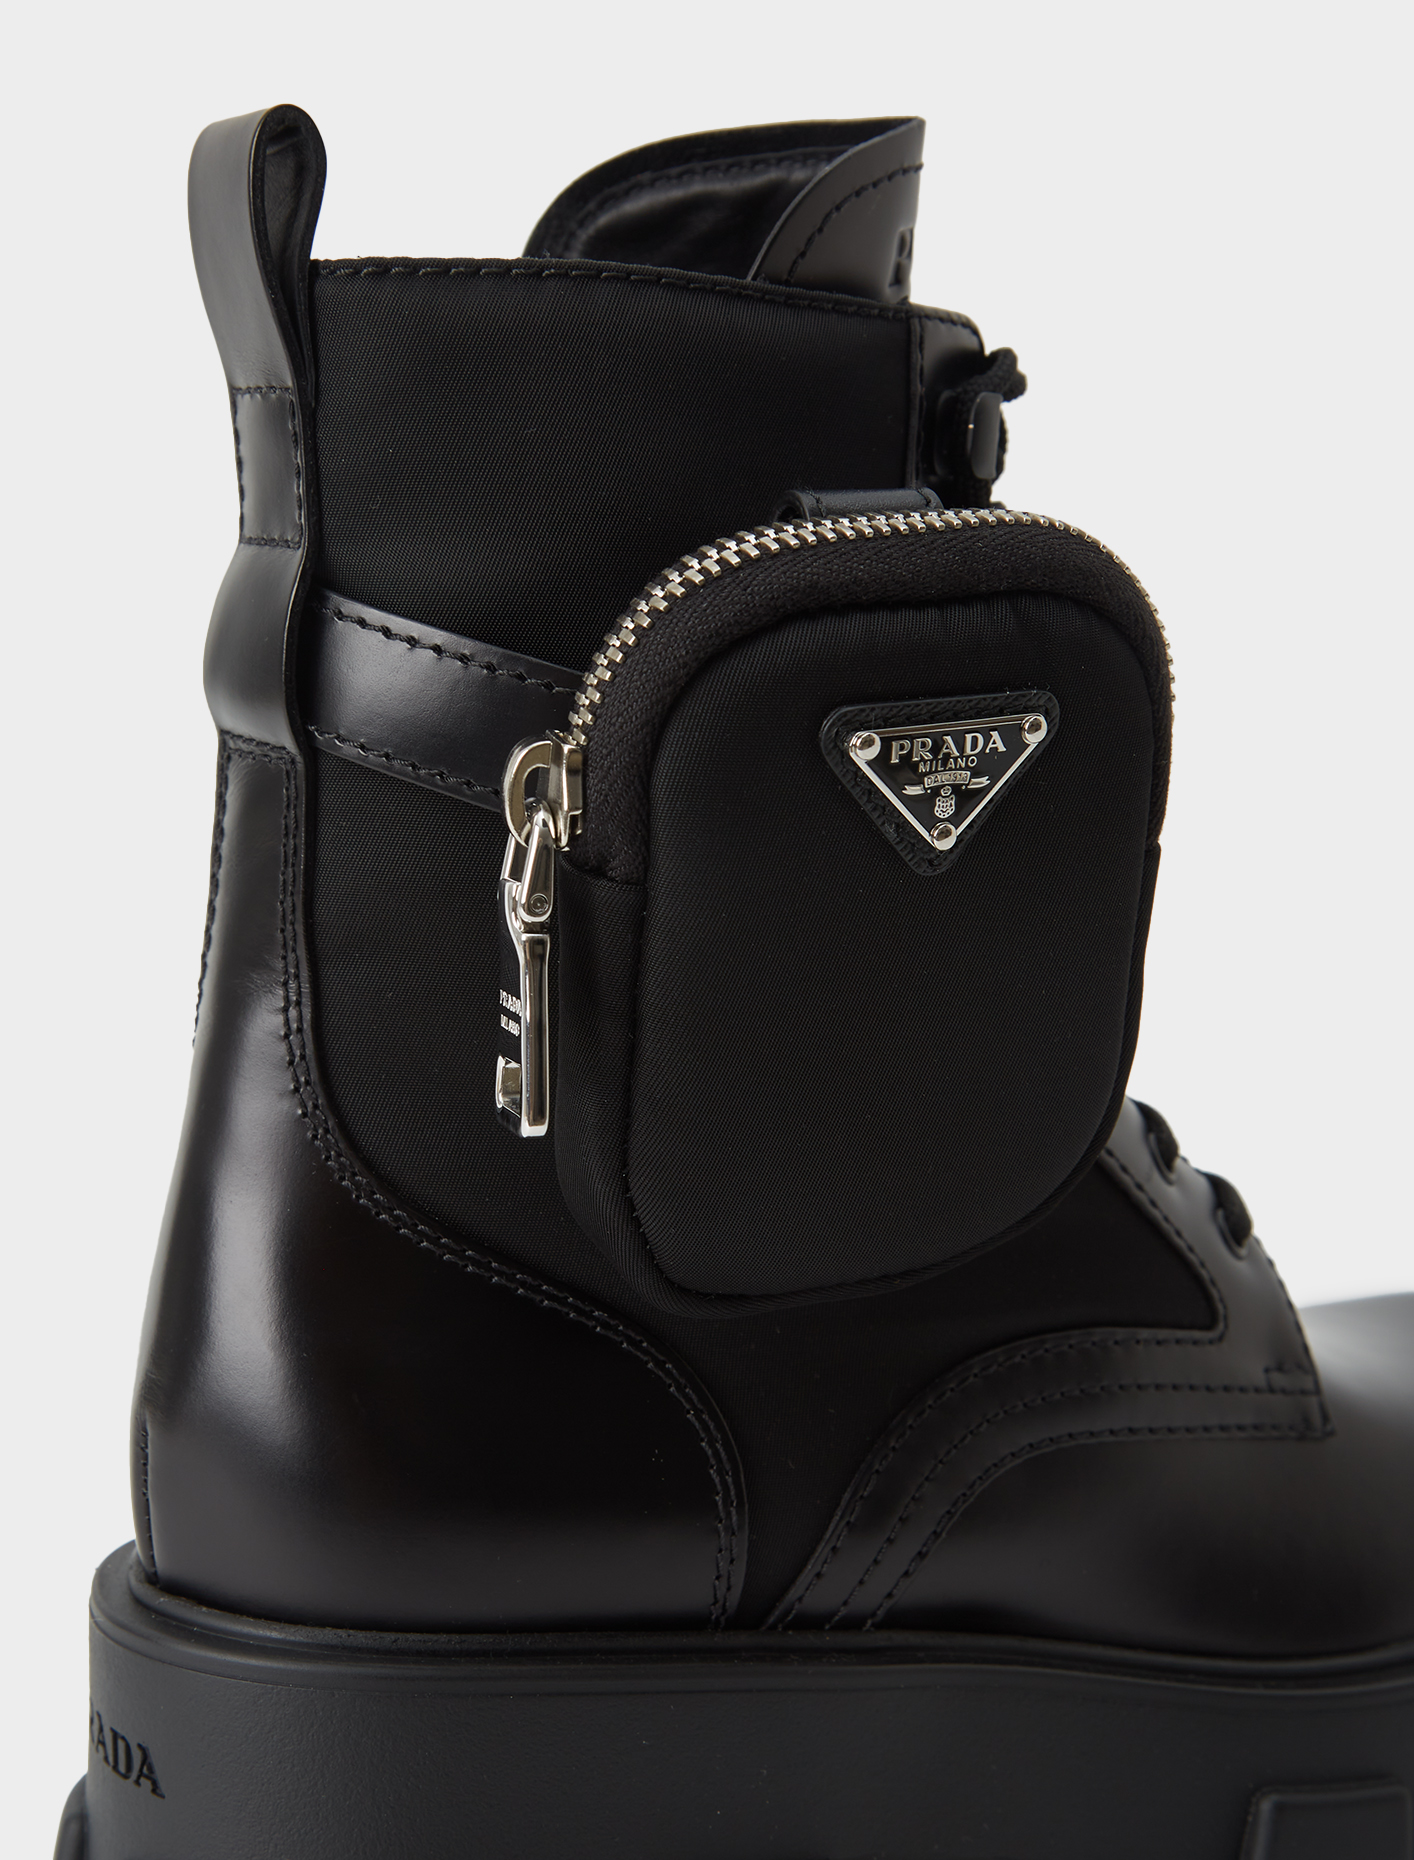 Prada Leather Combat Boots with Removable Nylon Pouch | Voo Store